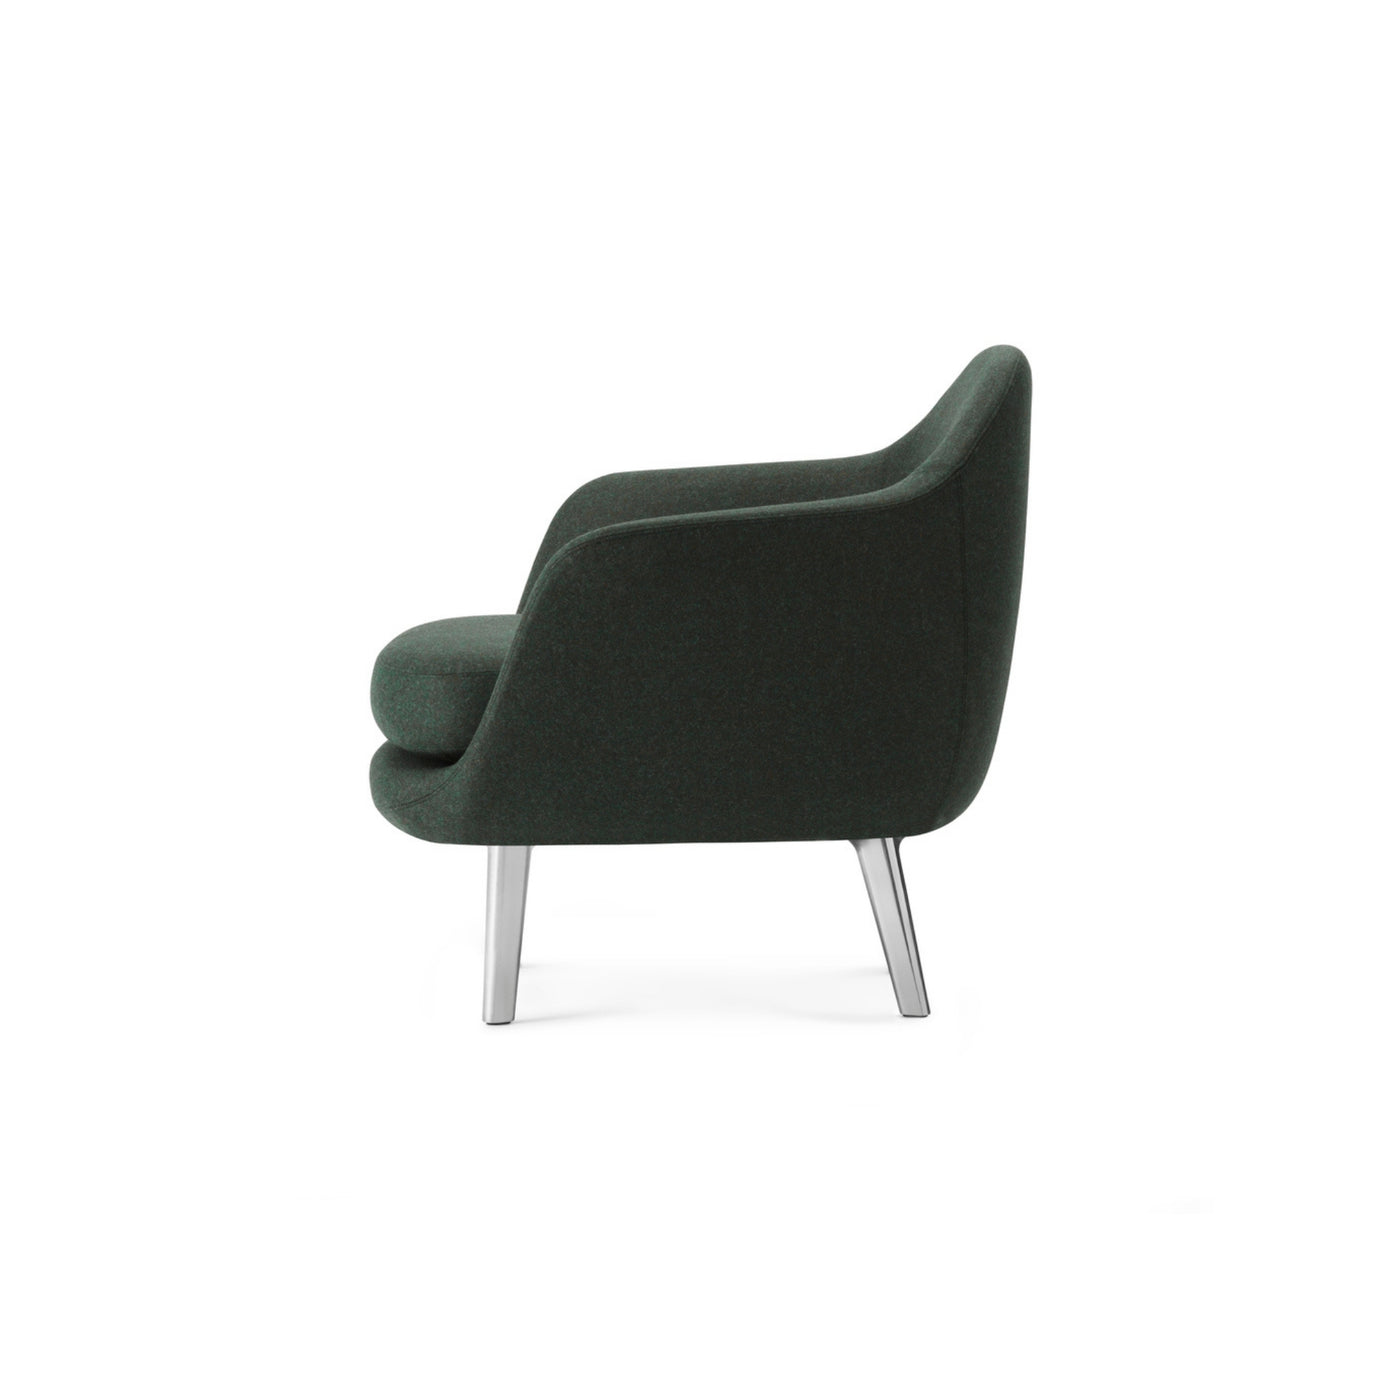 Normann Copenhagen Sum Armchair. Made to order at someday designs. #colour_synergy-couple